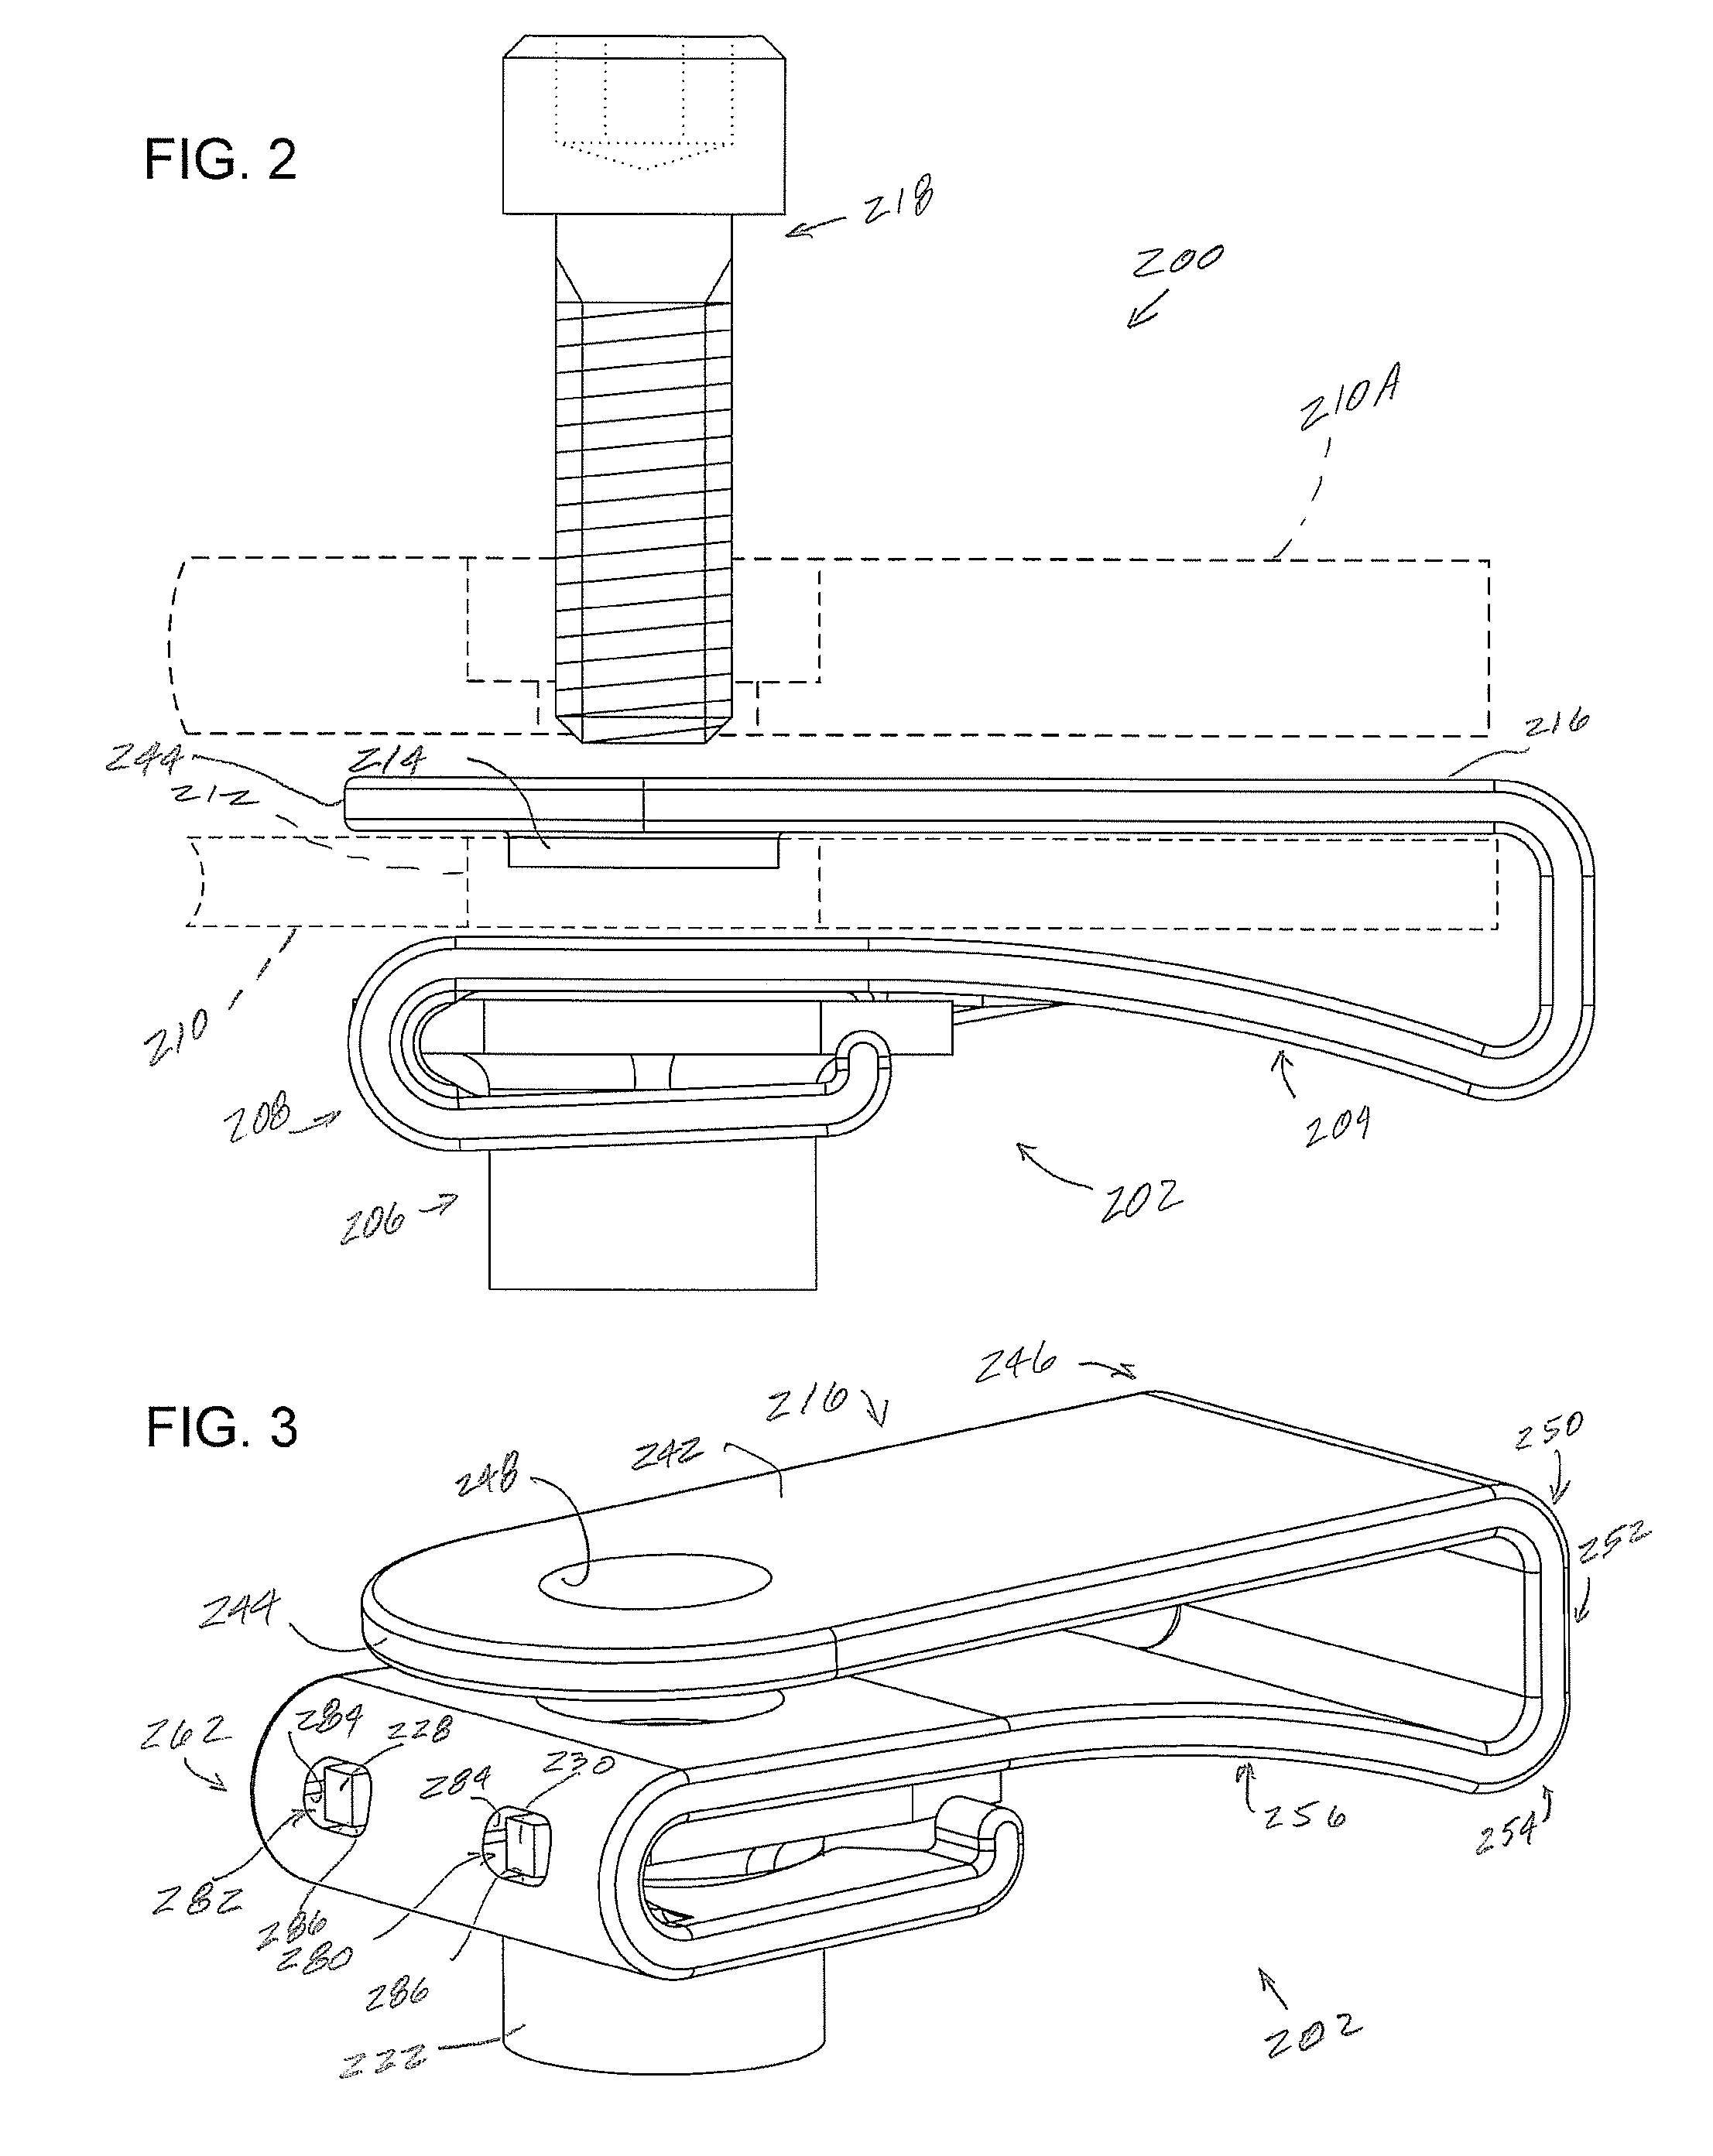 Apparatus and Methods for Fastening a Panel or Other Components